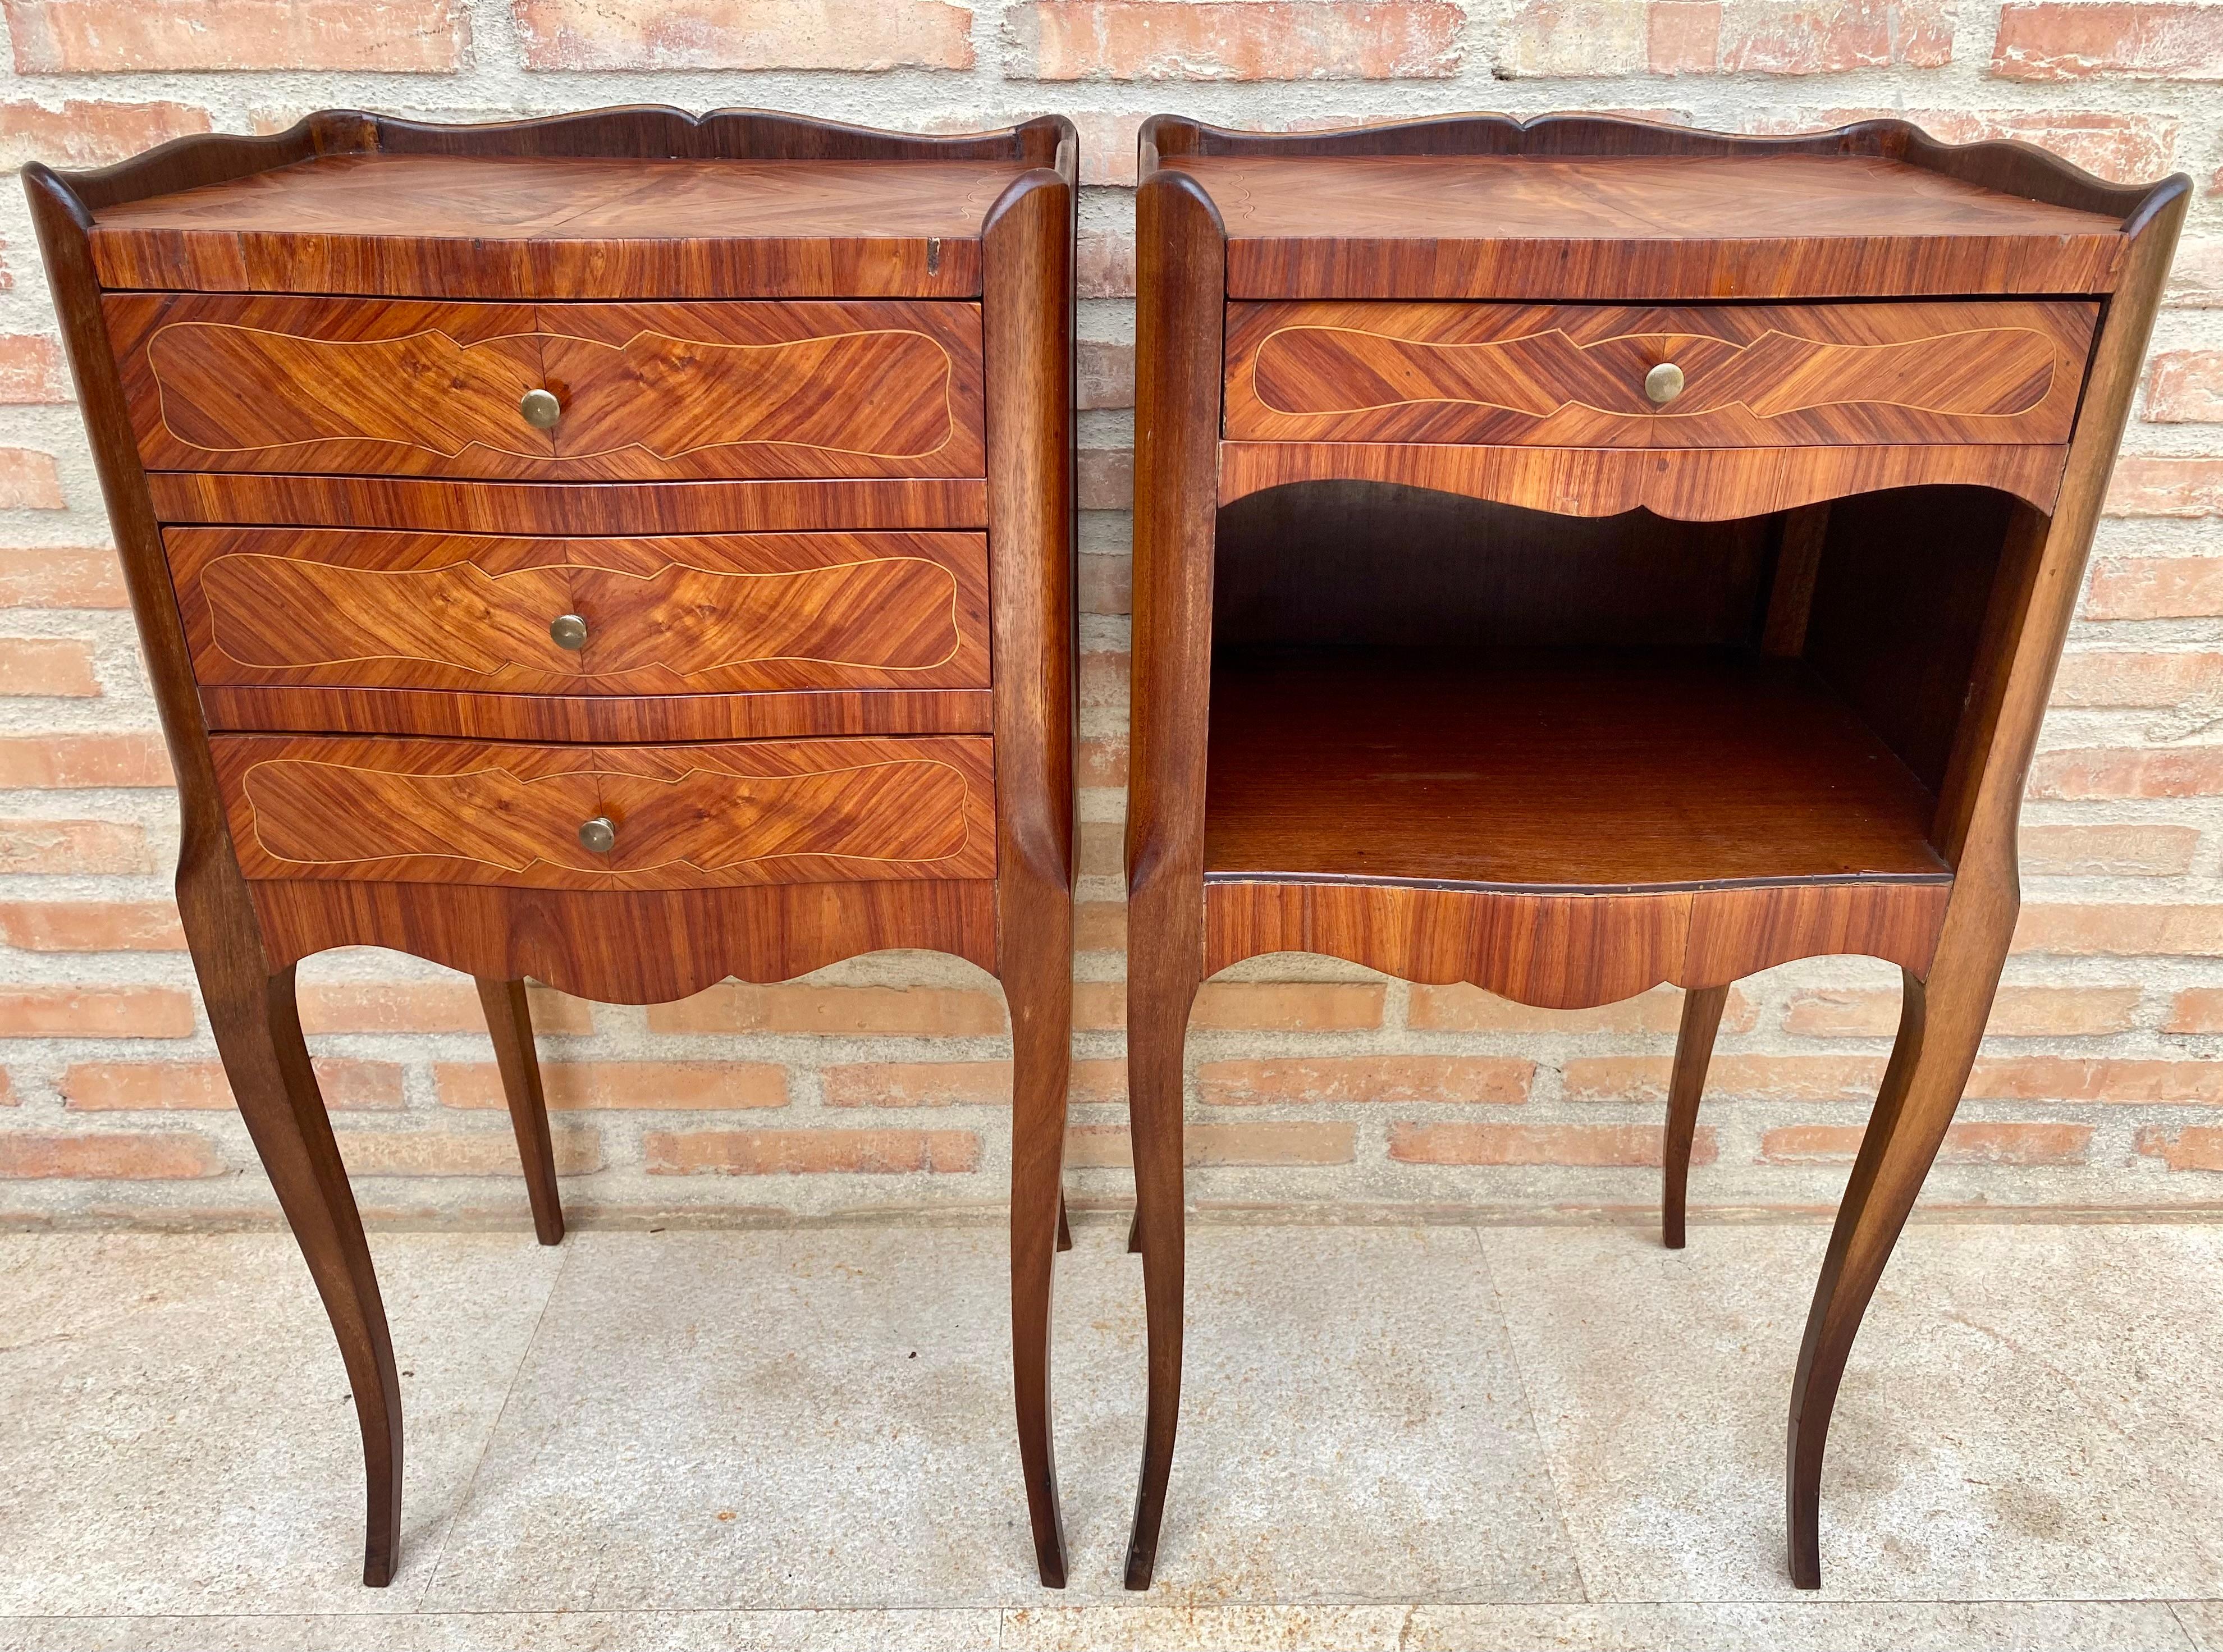 Description
Matching Kingwood Louis XV style nightstands, distinguished from each other in that one has three drawers and the other has one drawer and one open shelf, with marquetry on top, sides and front. The pieces retain their original